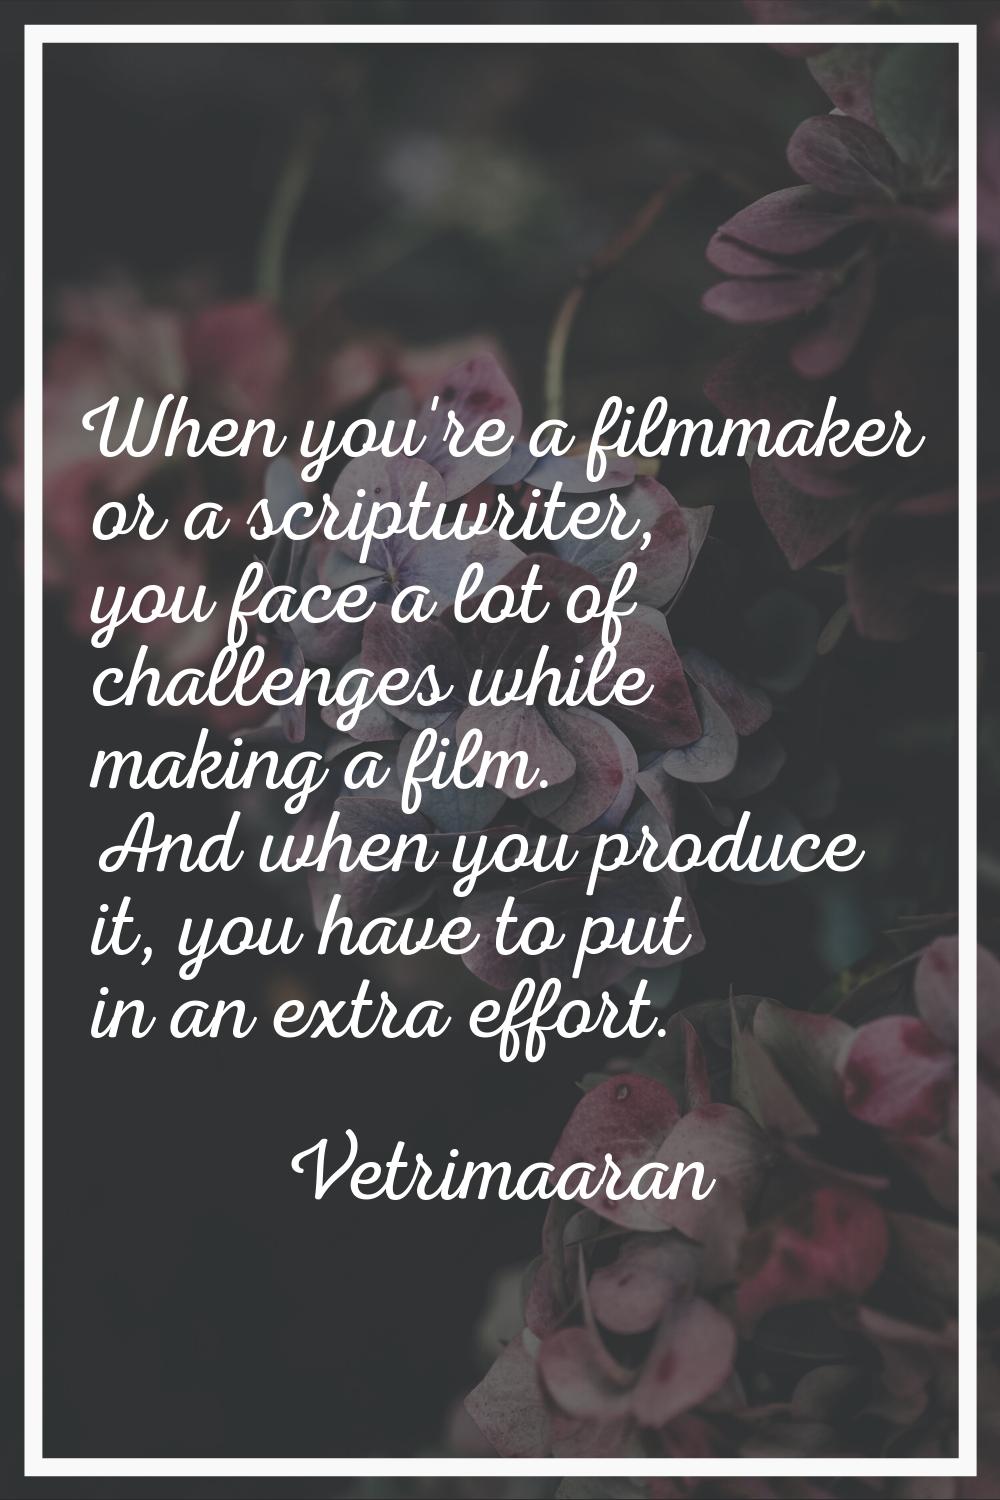 When you're a filmmaker or a scriptwriter, you face a lot of challenges while making a film. And wh